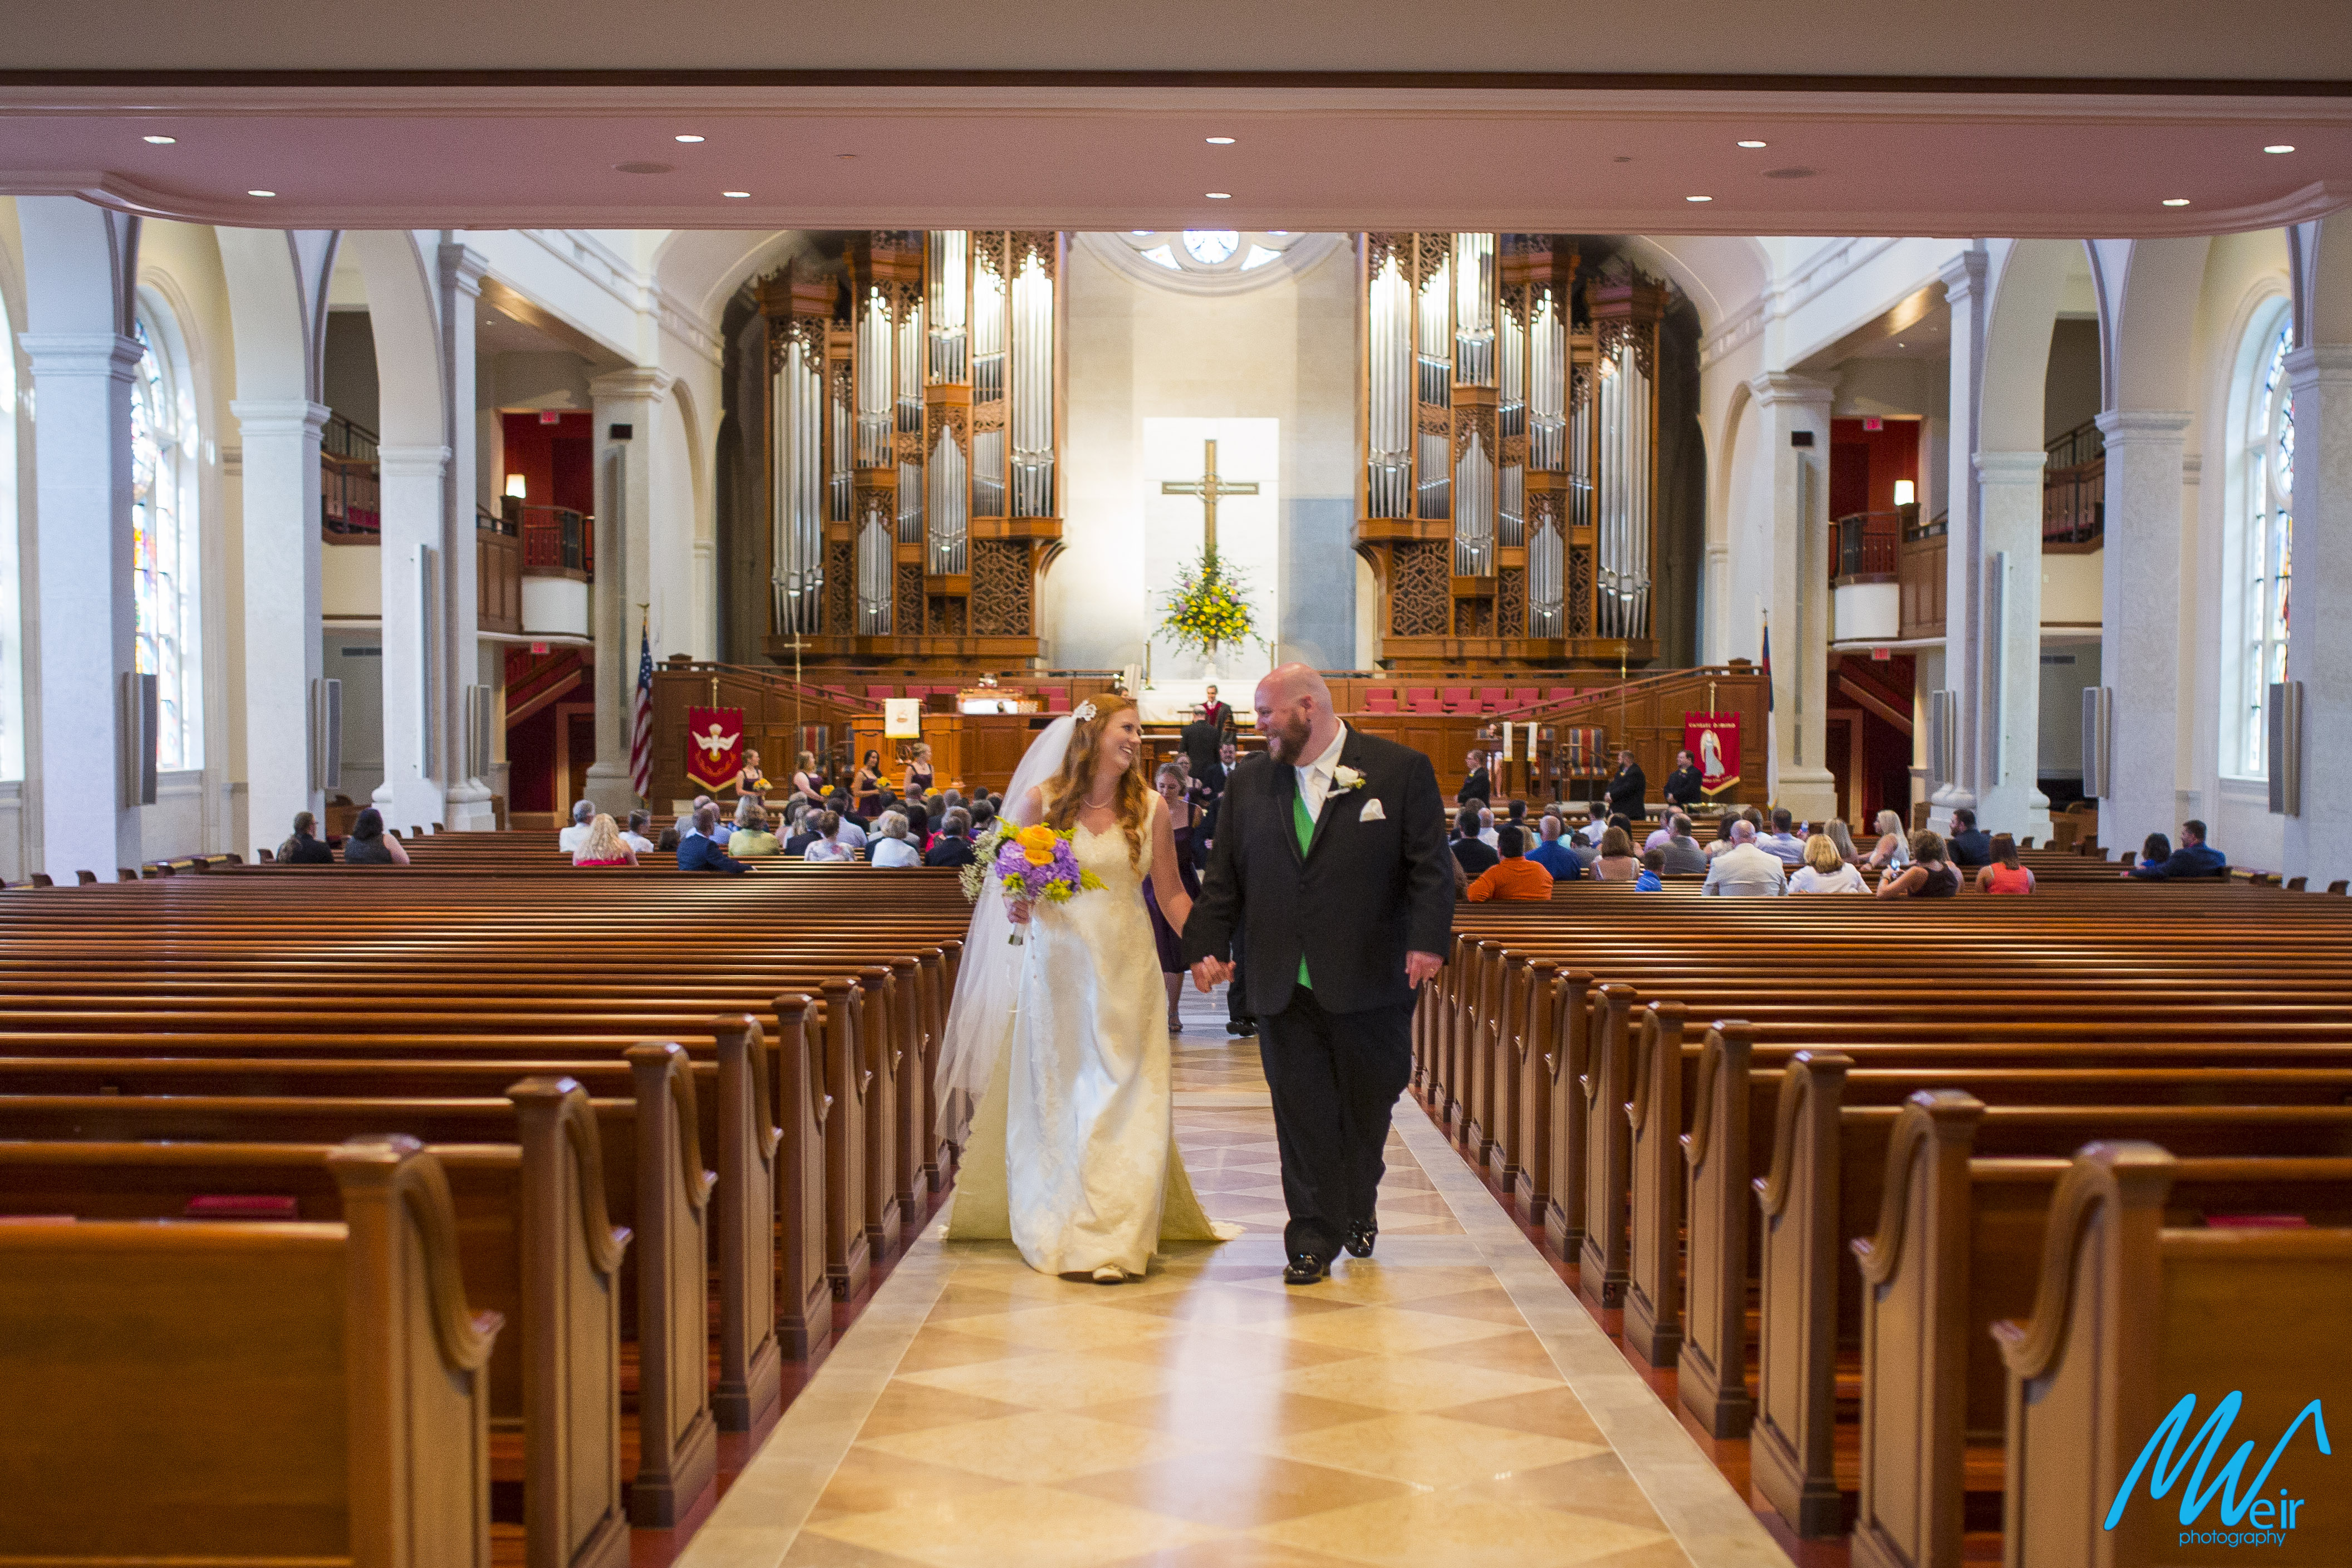 bride and groom walking back up aisle after getting married